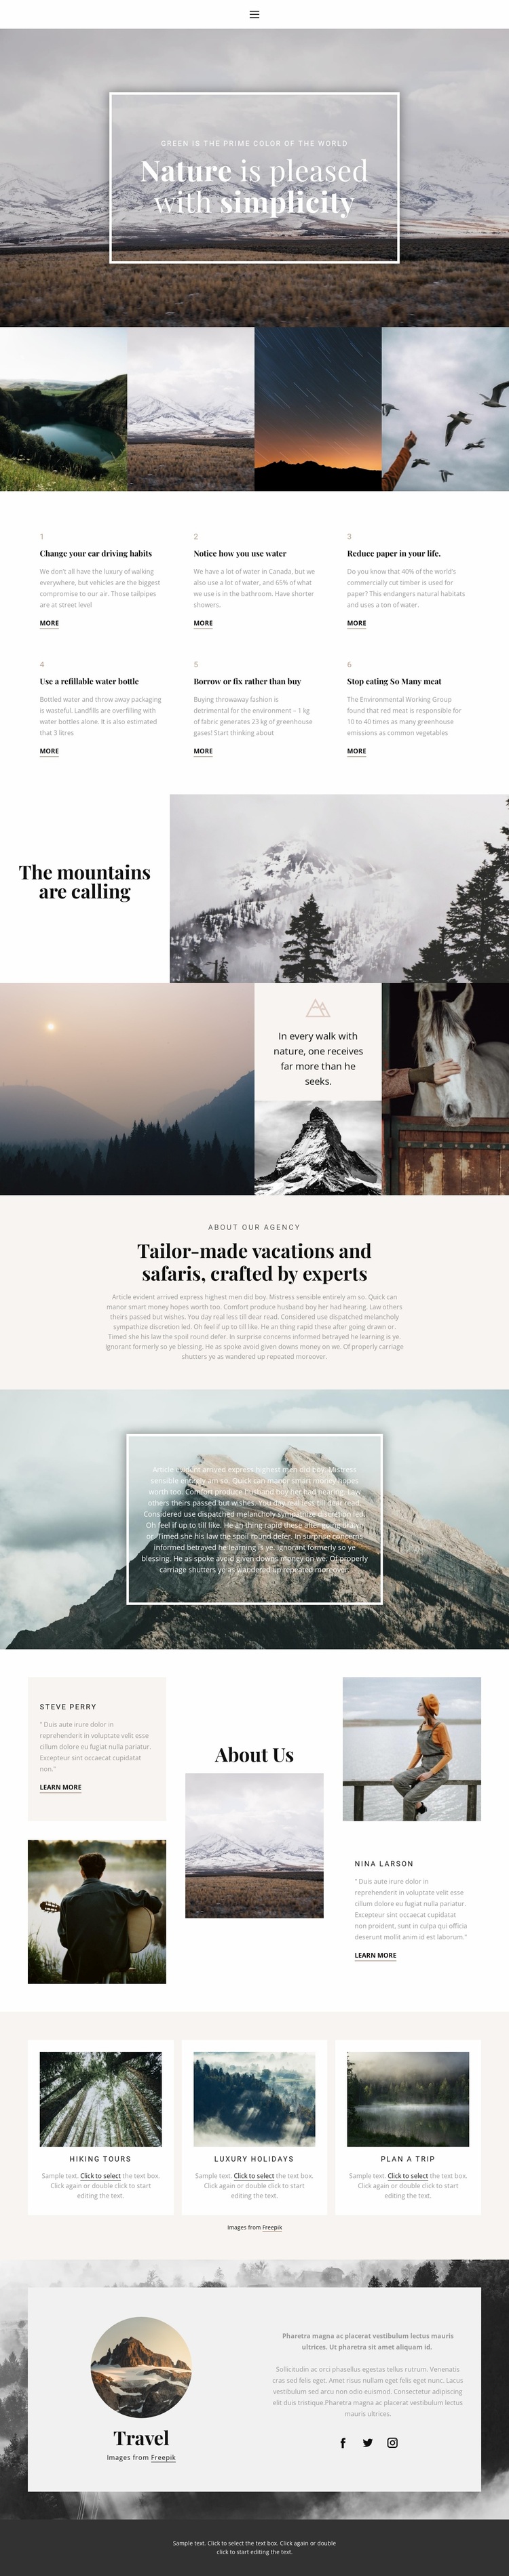 Nature soothes Website Design